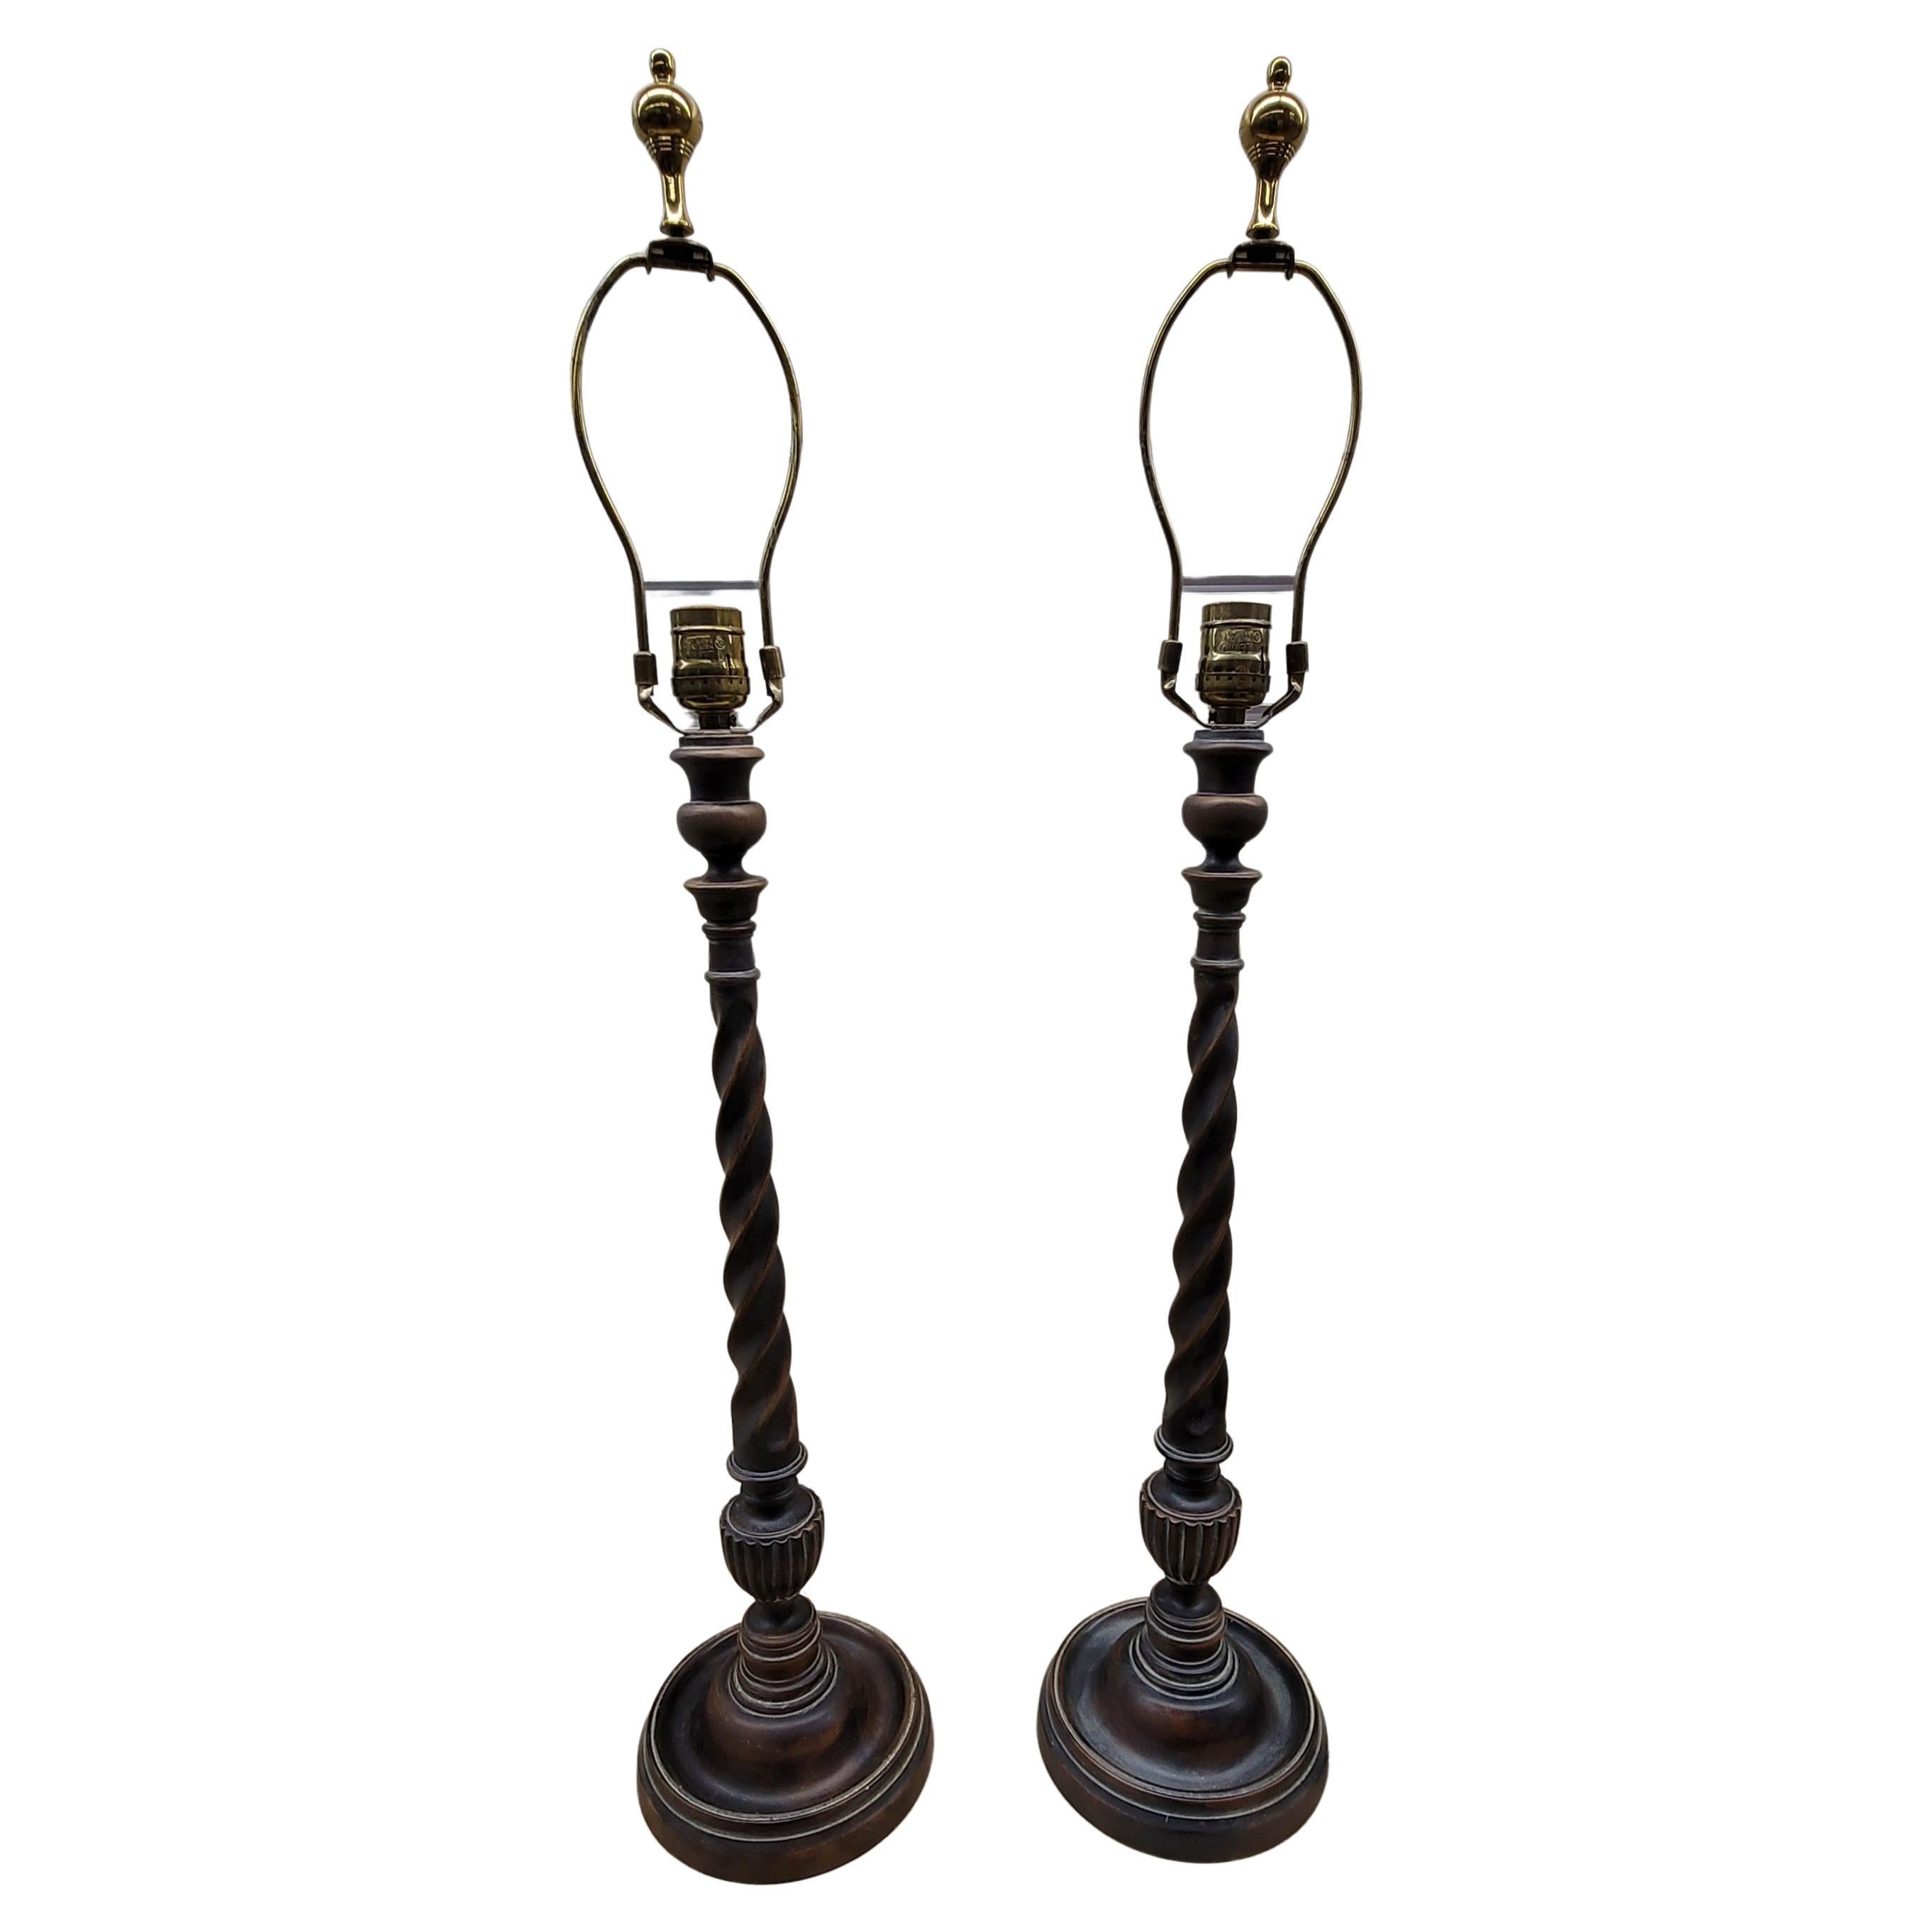 Pair Of As You Like It, barley twist solid Wood table lamps.
Measure 7 in diameter at the base, stand 25